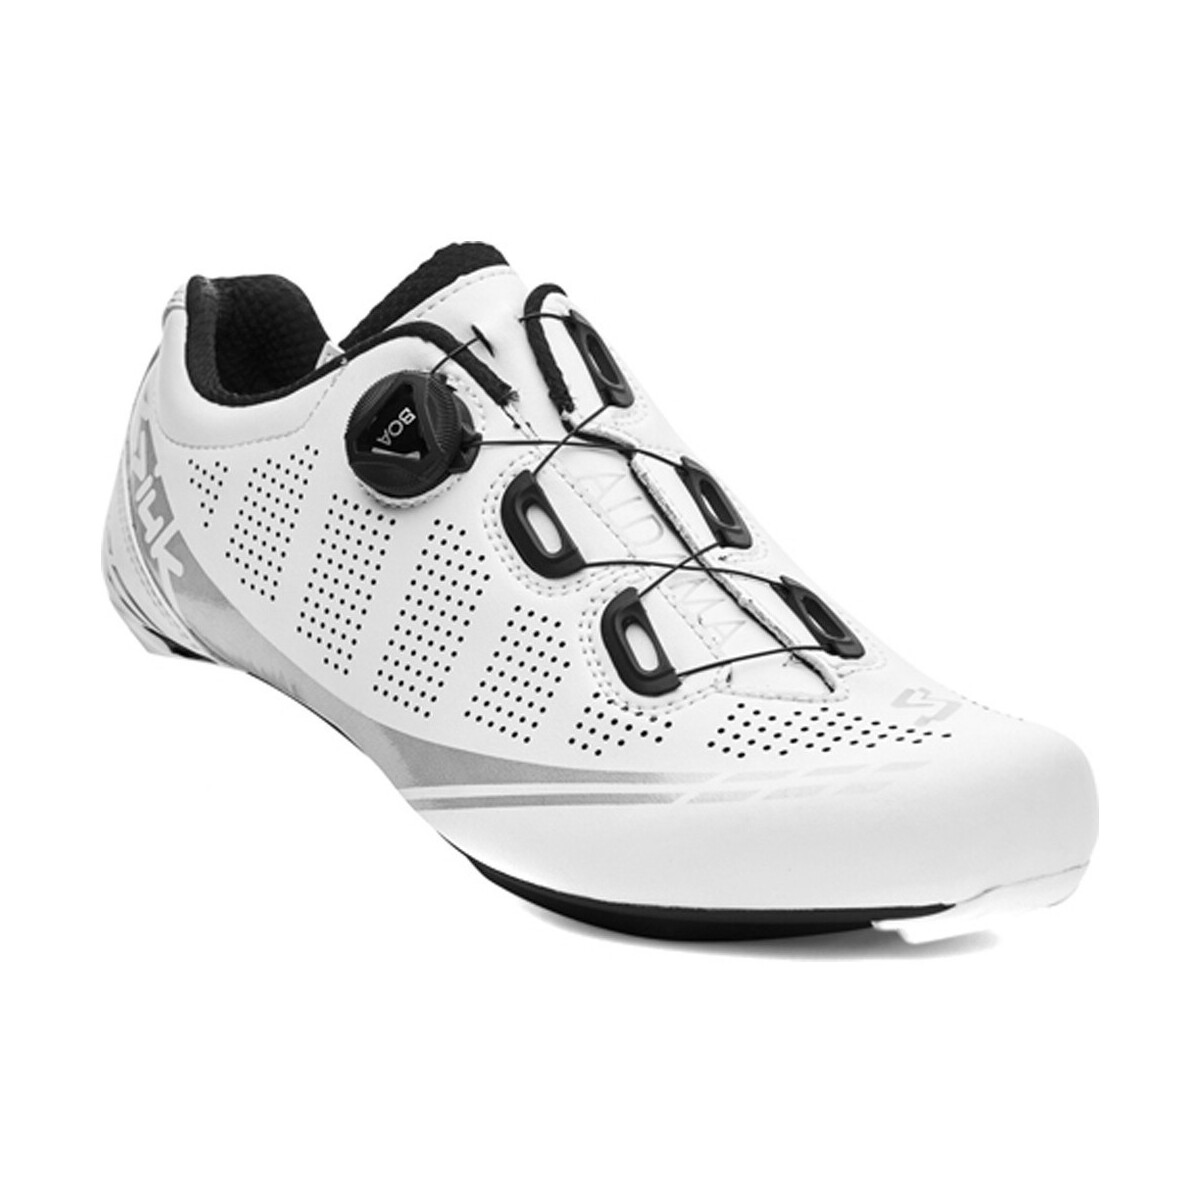 Chaussures Cyclisme Spiuk ALDAMA ROAD Blanc